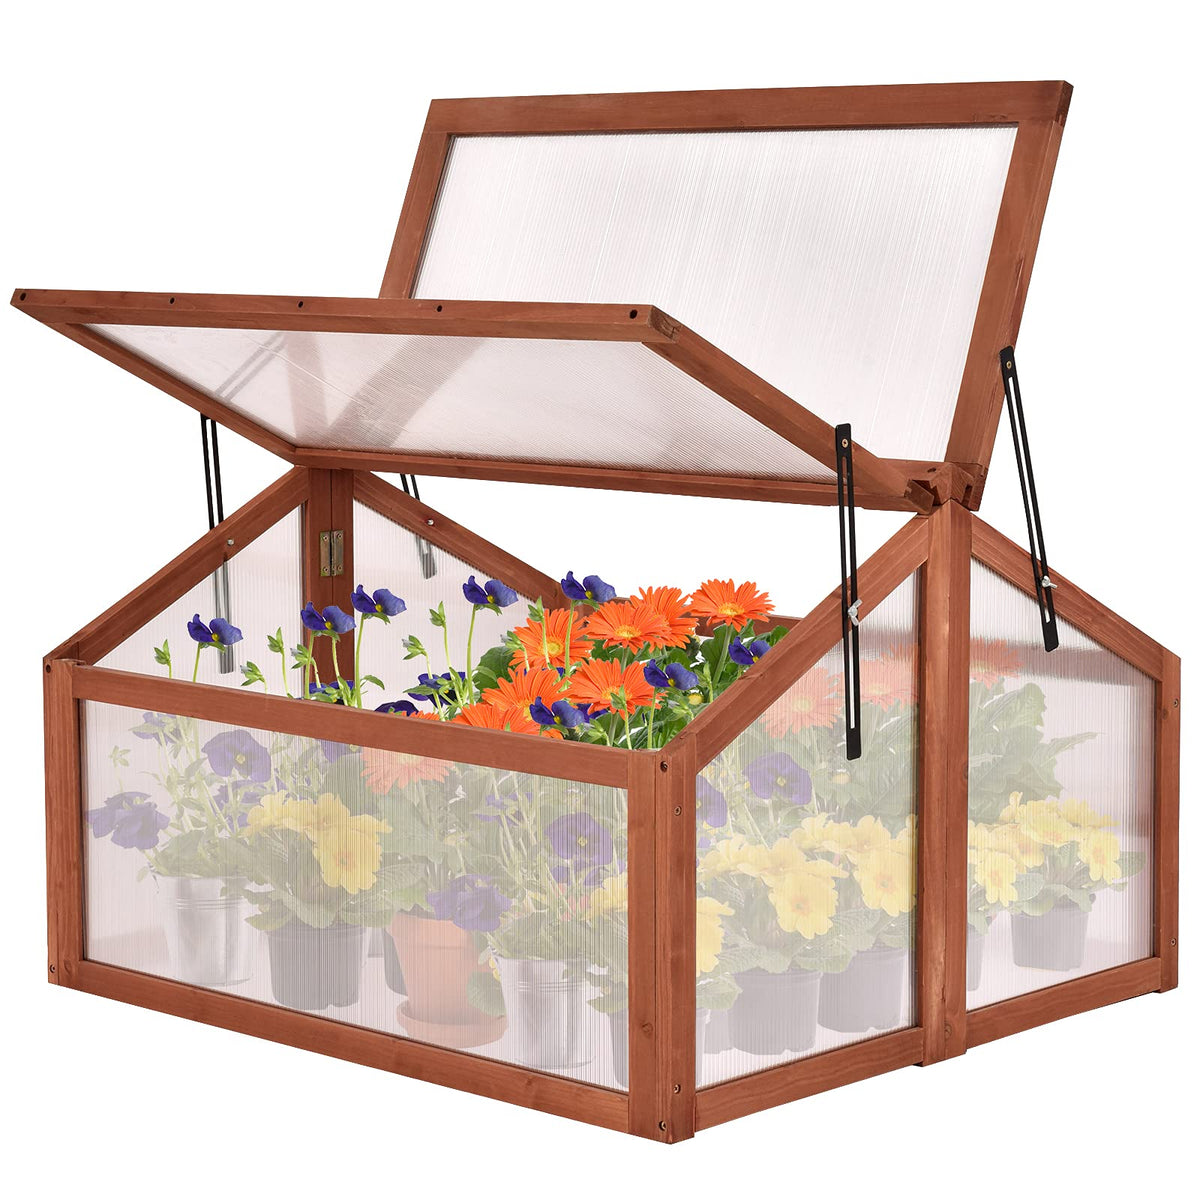 Giantex Wooden Cold Frame Greenhouse